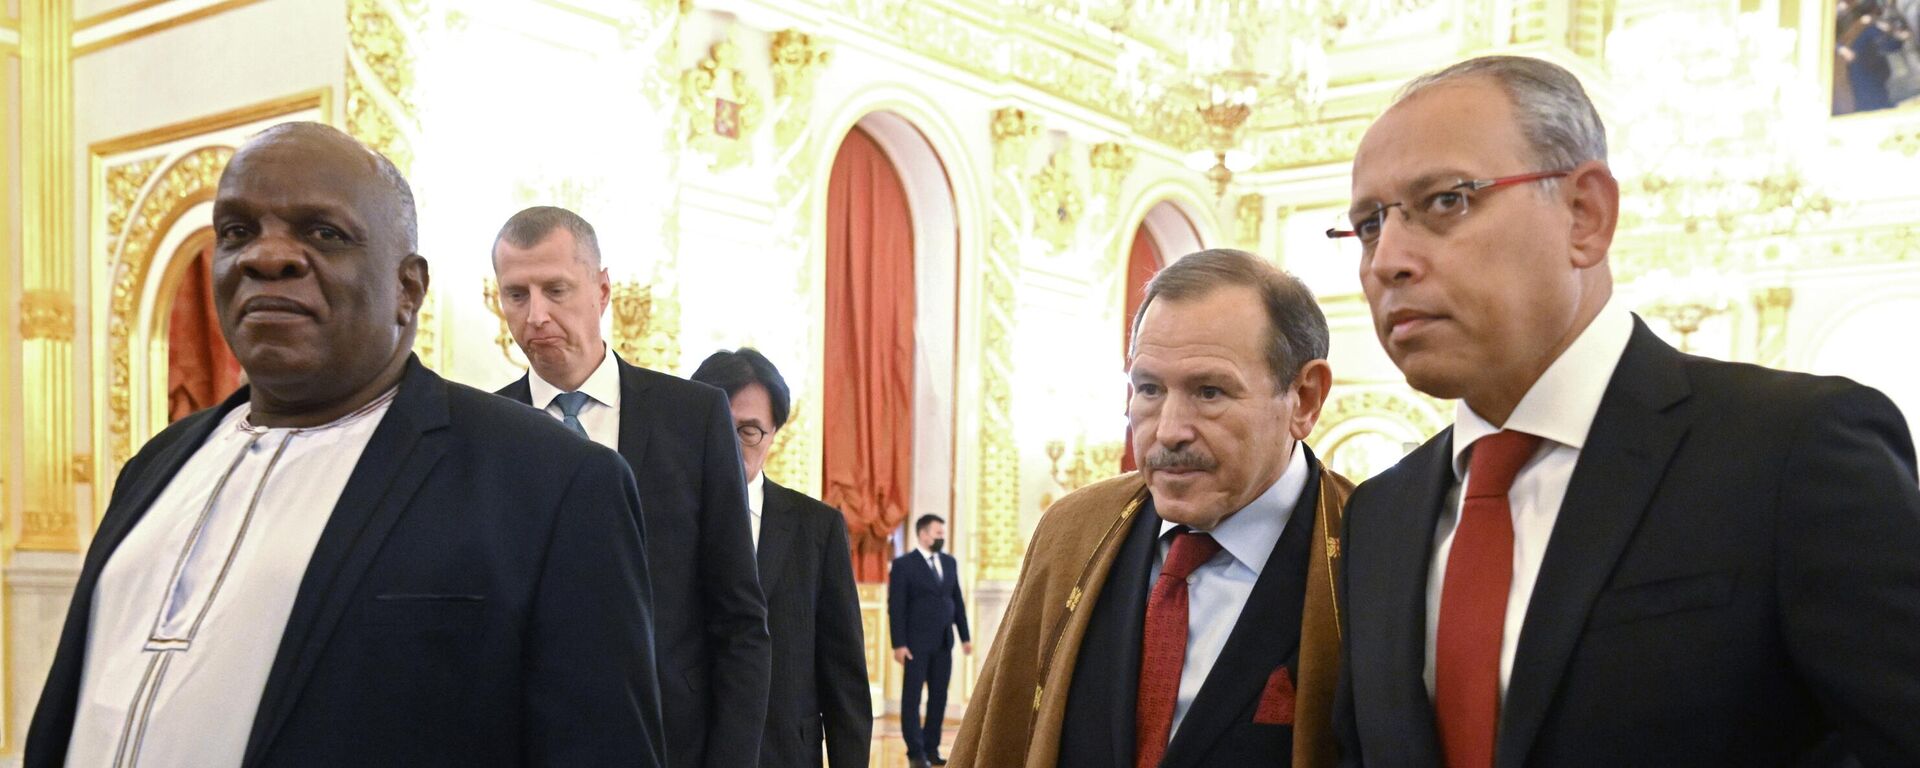 Moses Kawaaluuko Kizige (Republic of Uganda), Smail Benamara (People's Democratic Republic of Algeria) and Nazih Ali Bahaeldin Elnaggari (Arab Republic of Egypt) (from left to right) after the ceremony of presenting credentials to Russian President Vladimir Putin by Ambassadors Extraordinary and Plenipotentiary of Foreign States in the Alexander Hall of the Bolshoi Kremlin palace. - Sputnik Africa, 1920, 07.06.2023